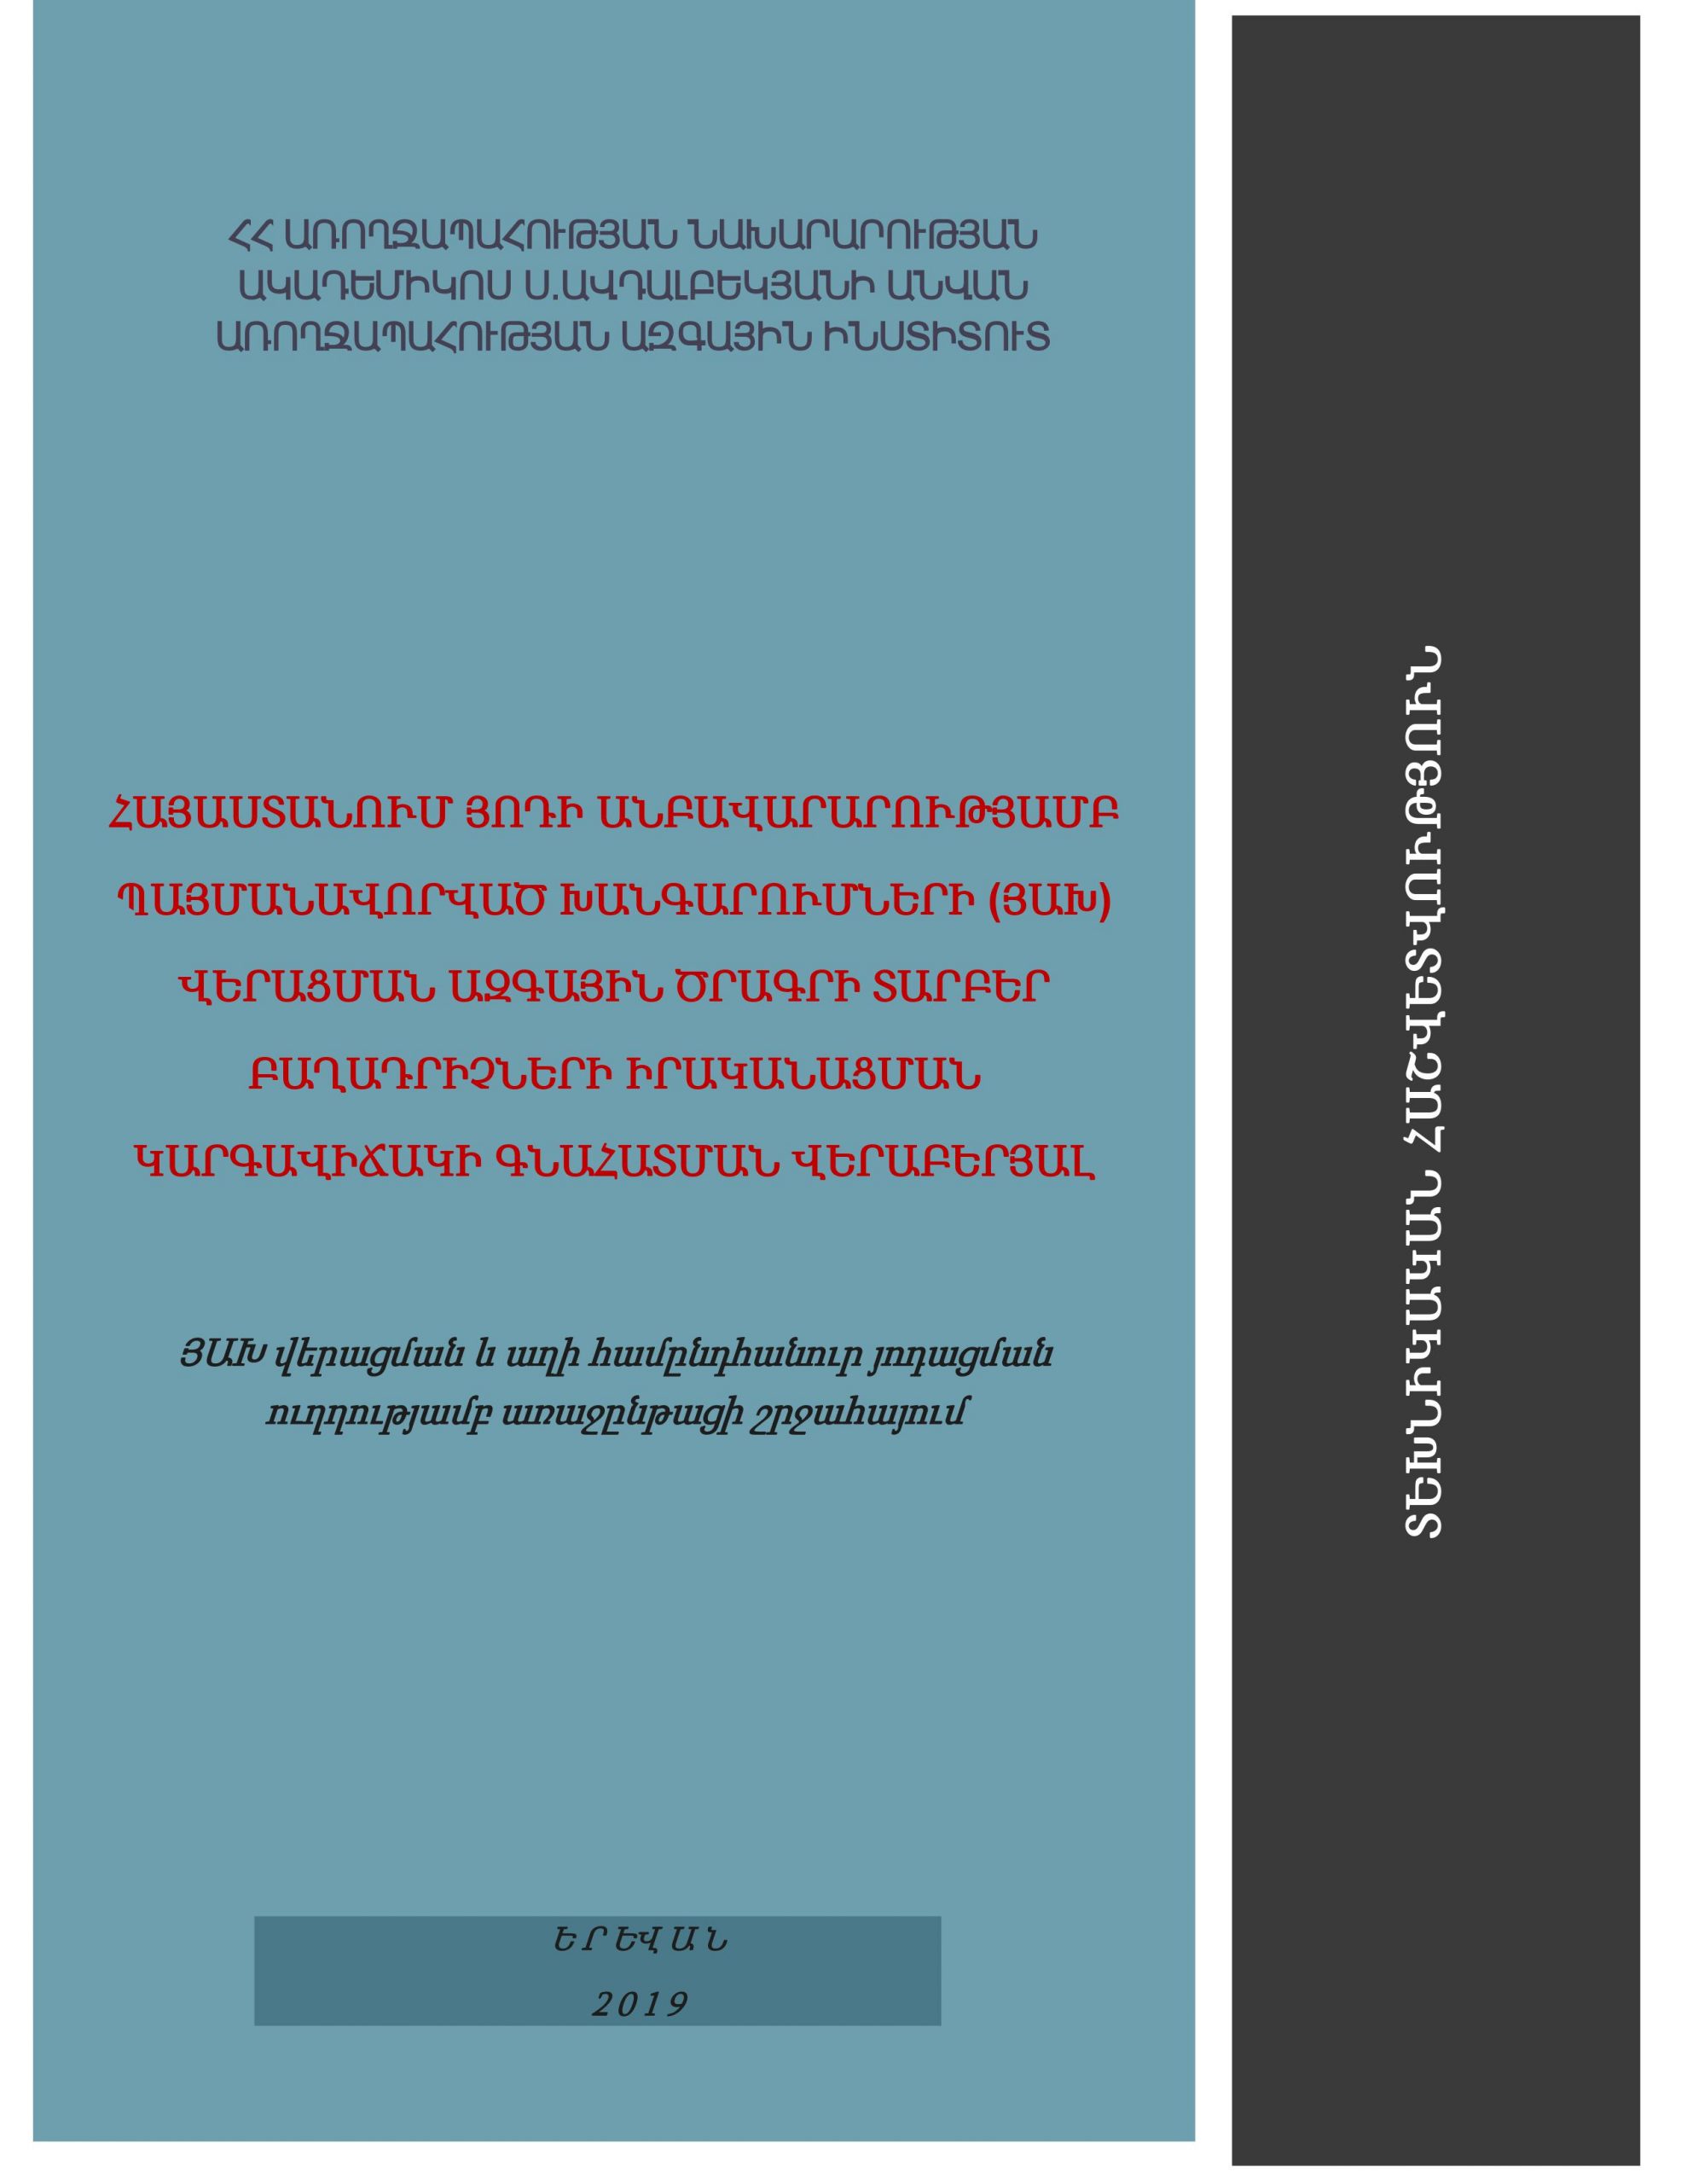 Technical Report on the Assessment of the Status of Implementation of the various components of the National Program on Elimination of Iodine Deficiency Disorders (IUDs) in Armenia